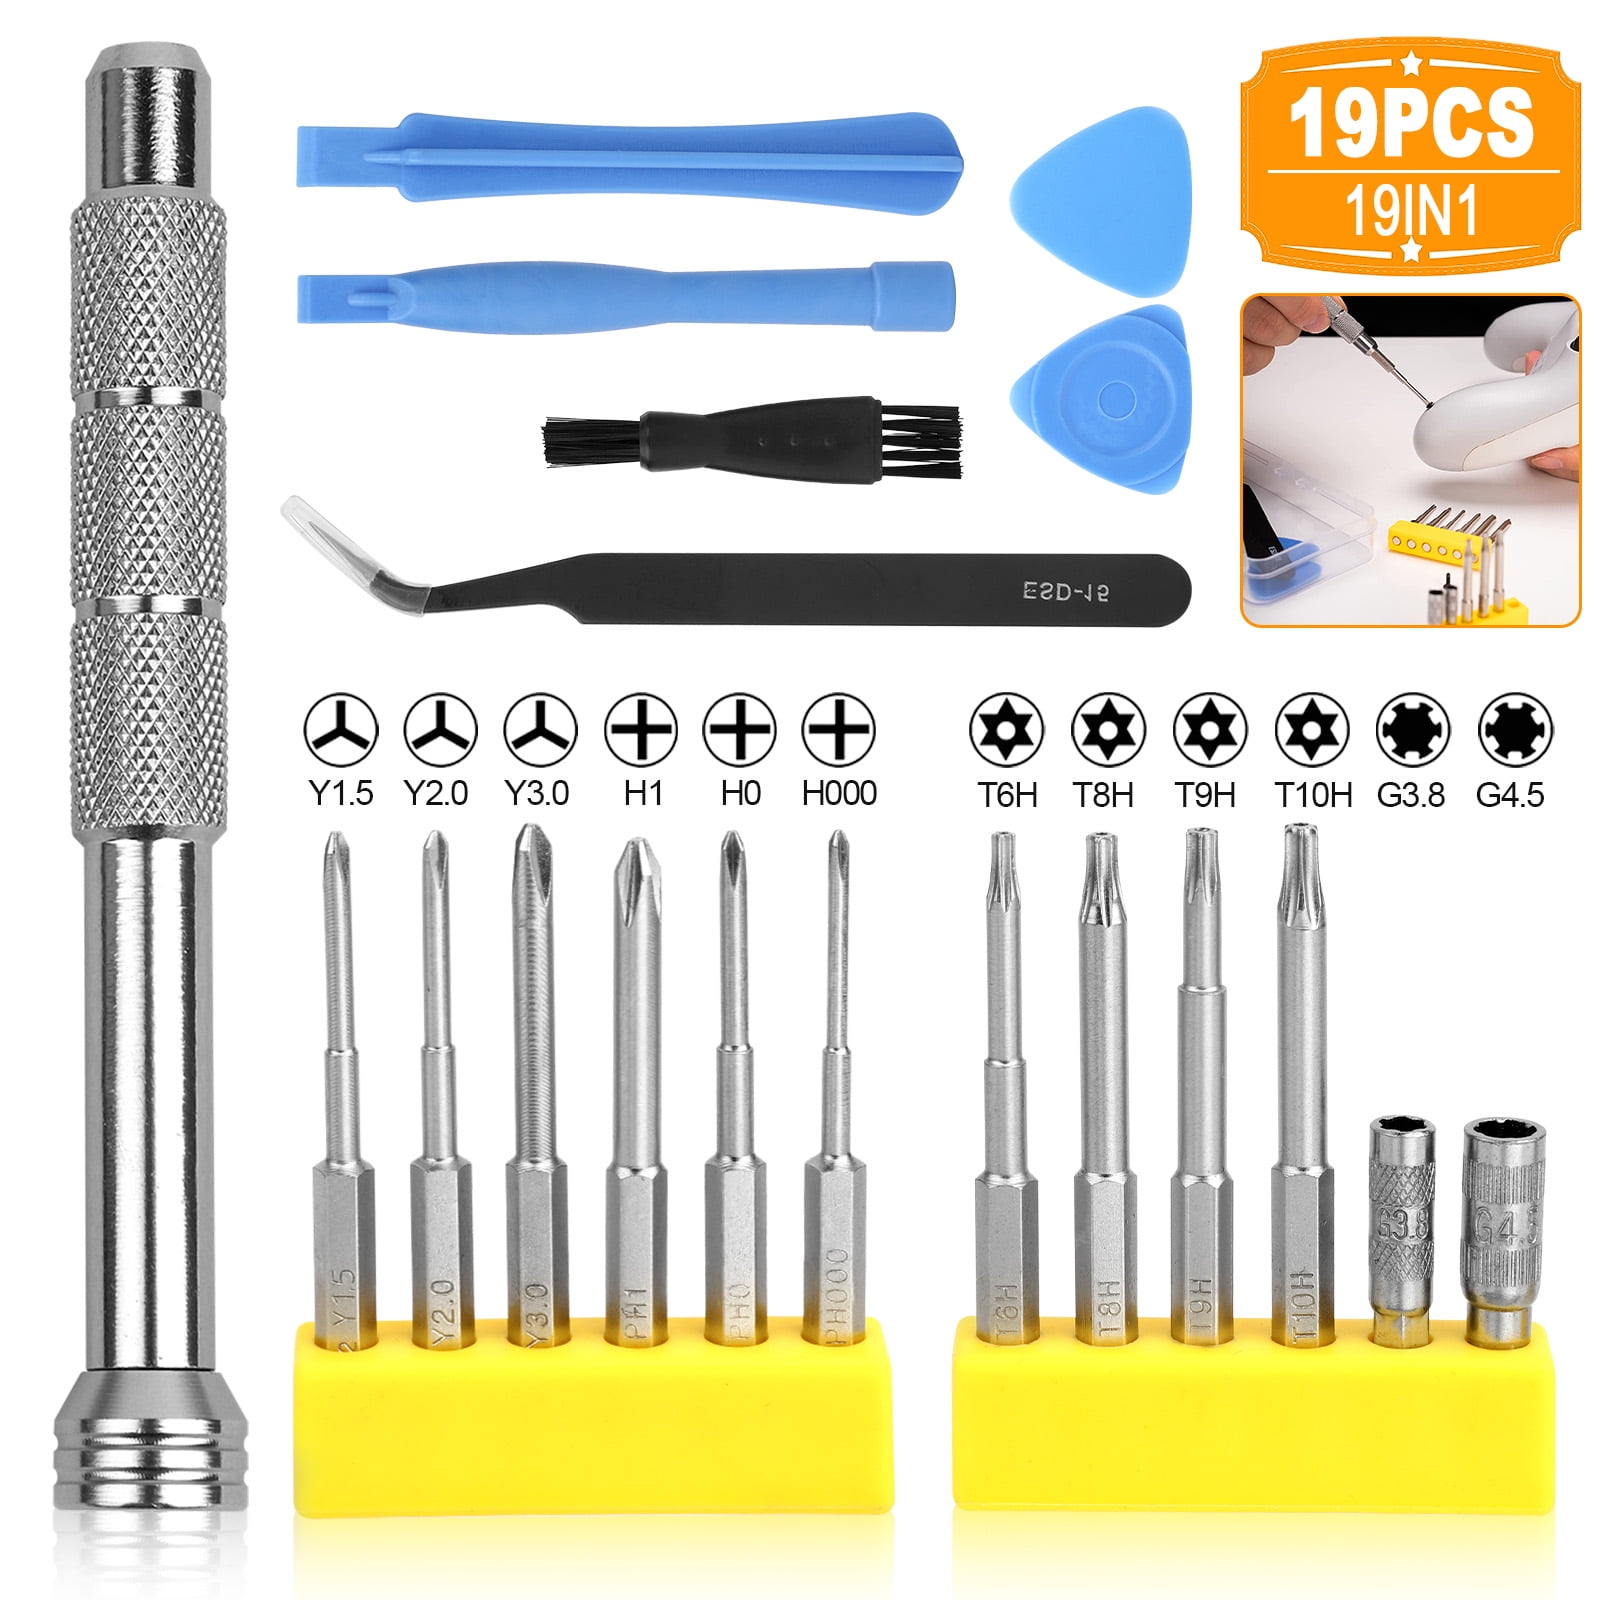 T8 Torx Security Tamper proof Screwdriver Tool Bit Disassembly for Xbox TR8  T8H